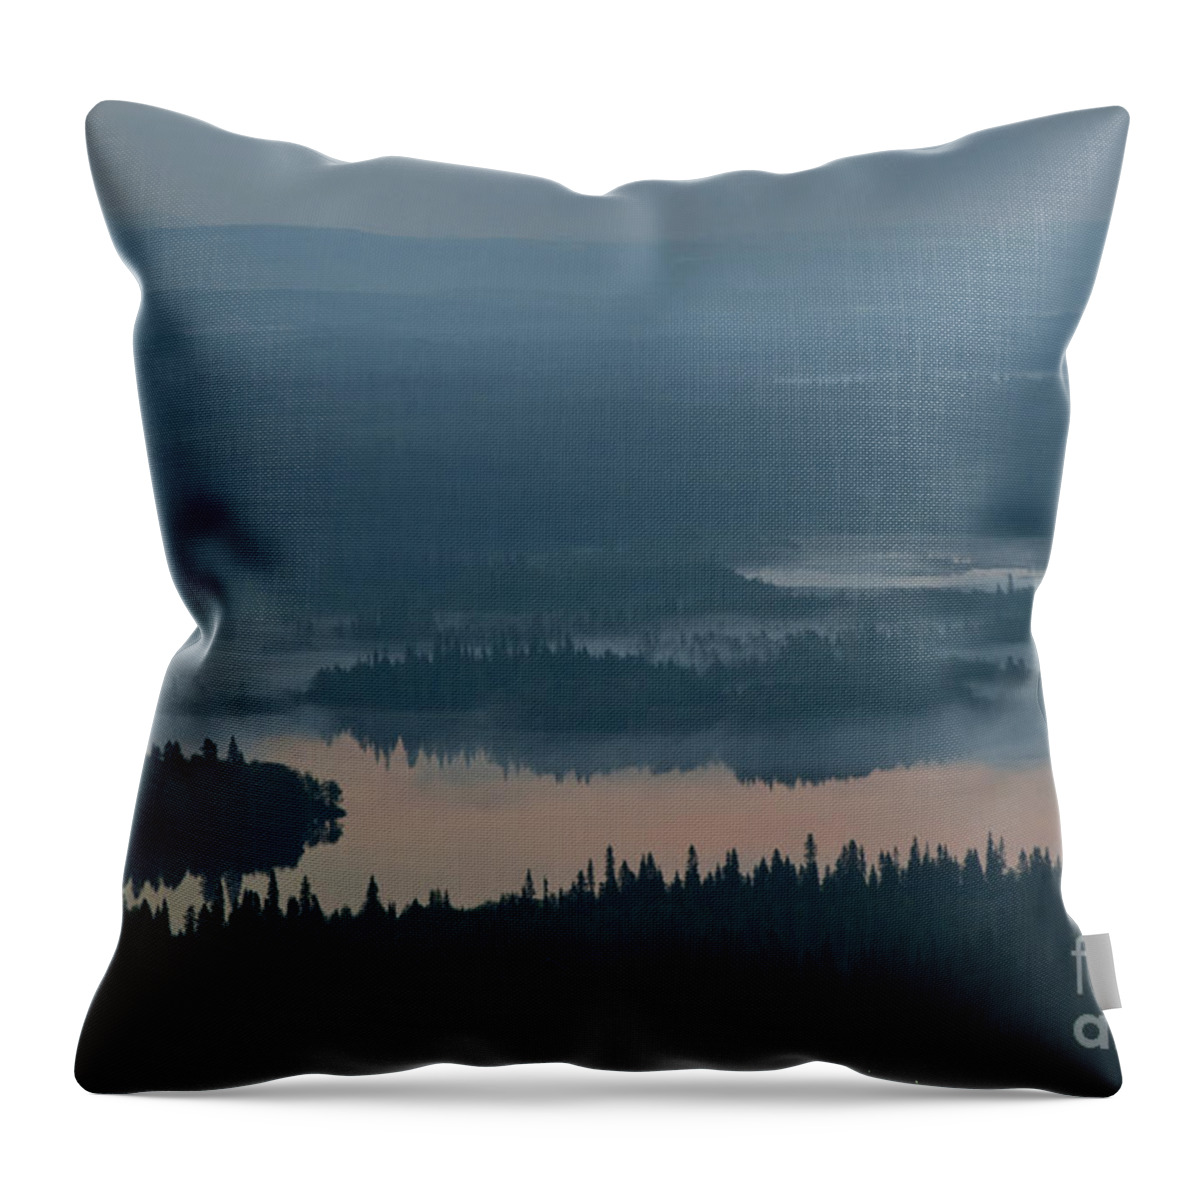 Europe Throw Pillow featuring the photograph Finish Lakeland in the Mist by Heiko Koehrer-Wagner